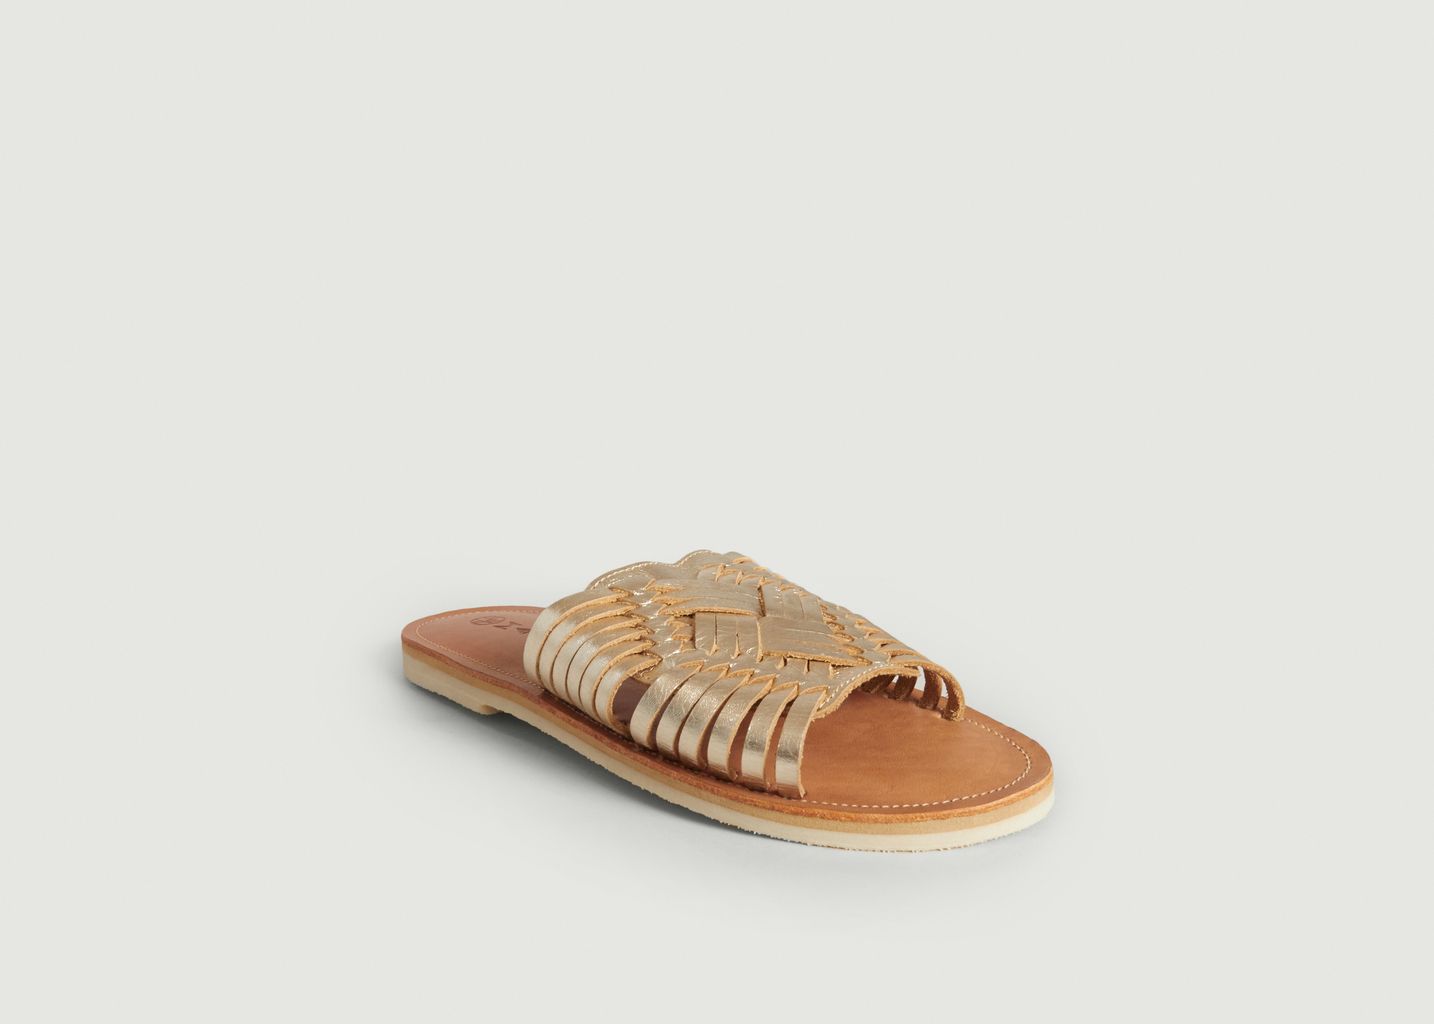 Isla sandals in cowhide leather - Mapache